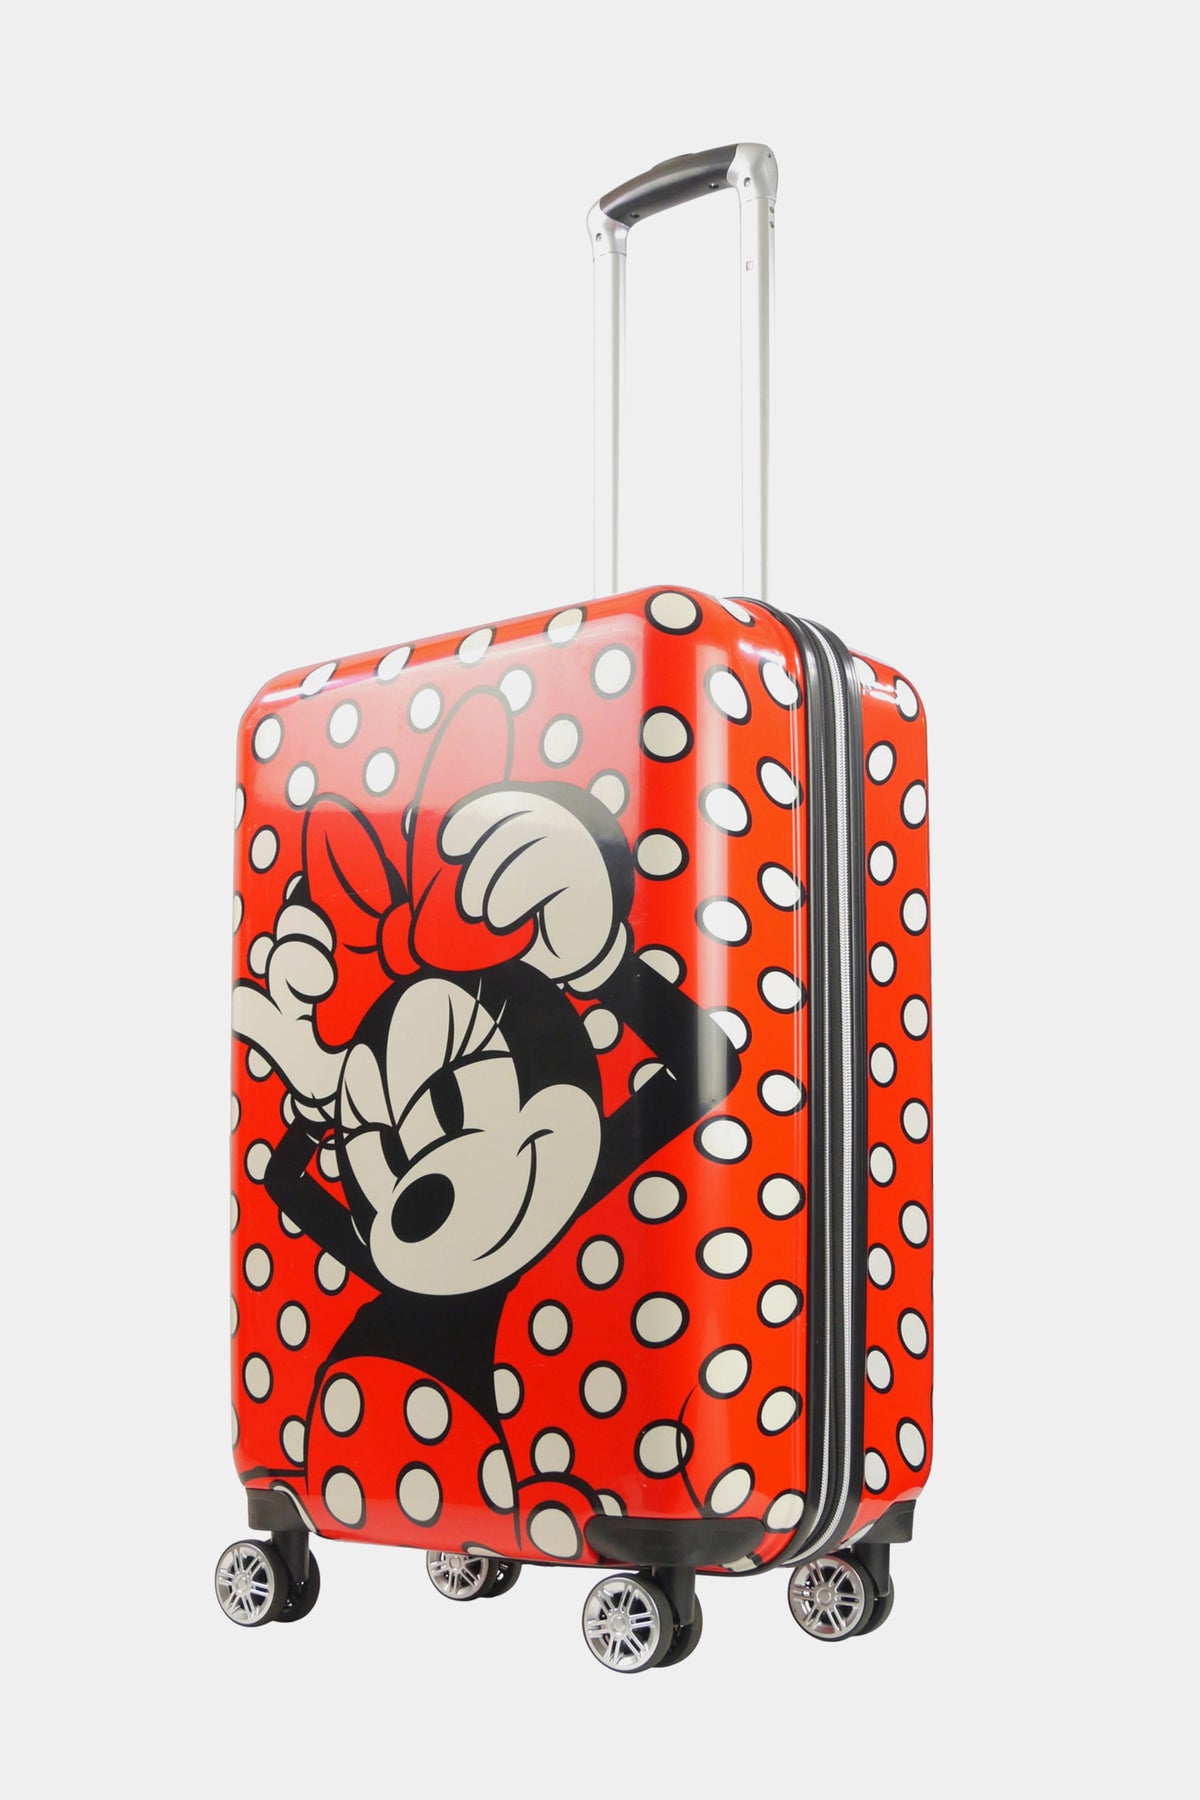 bijtend geleider talent Minnie Mouse Printed Polka Dot II Spinner Luggage – Lord & Taylor